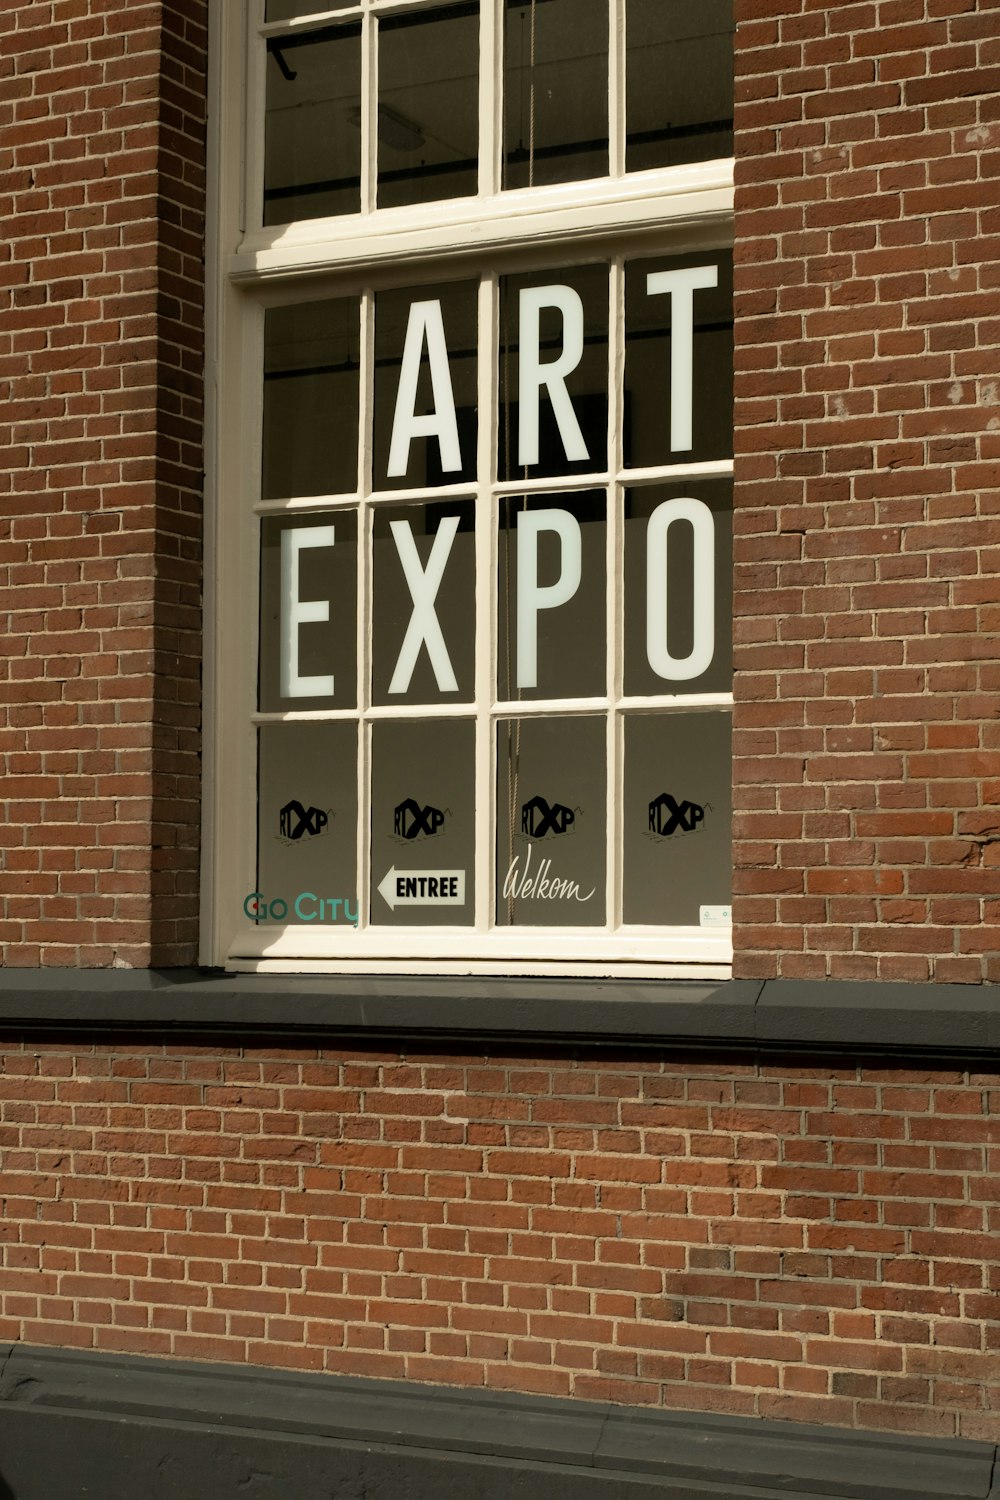 a brick building with a window that says art expo